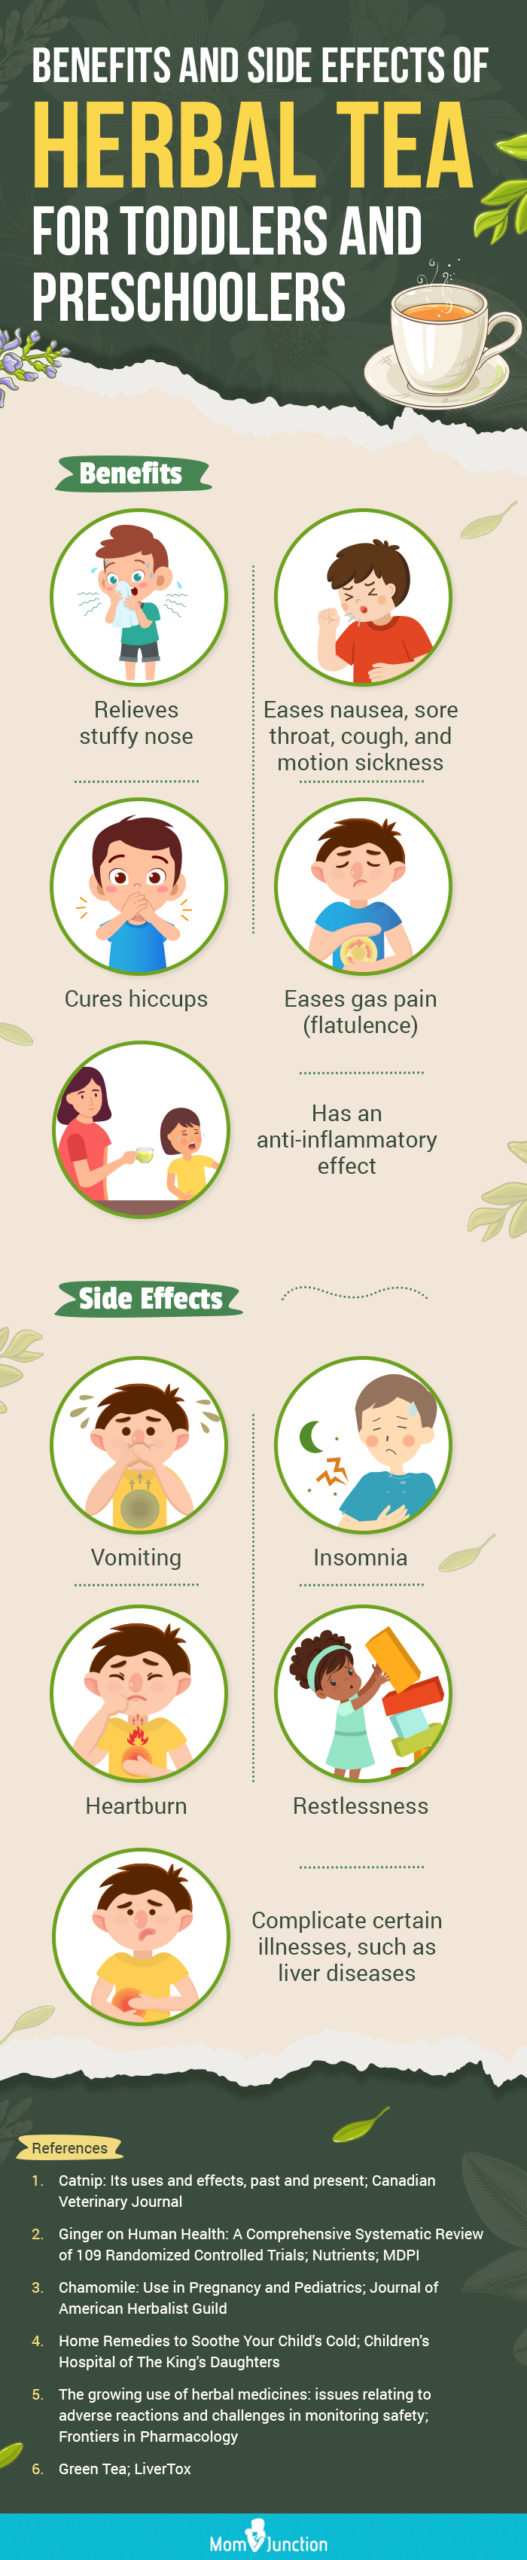 herbal tea for toddlers (infographic)